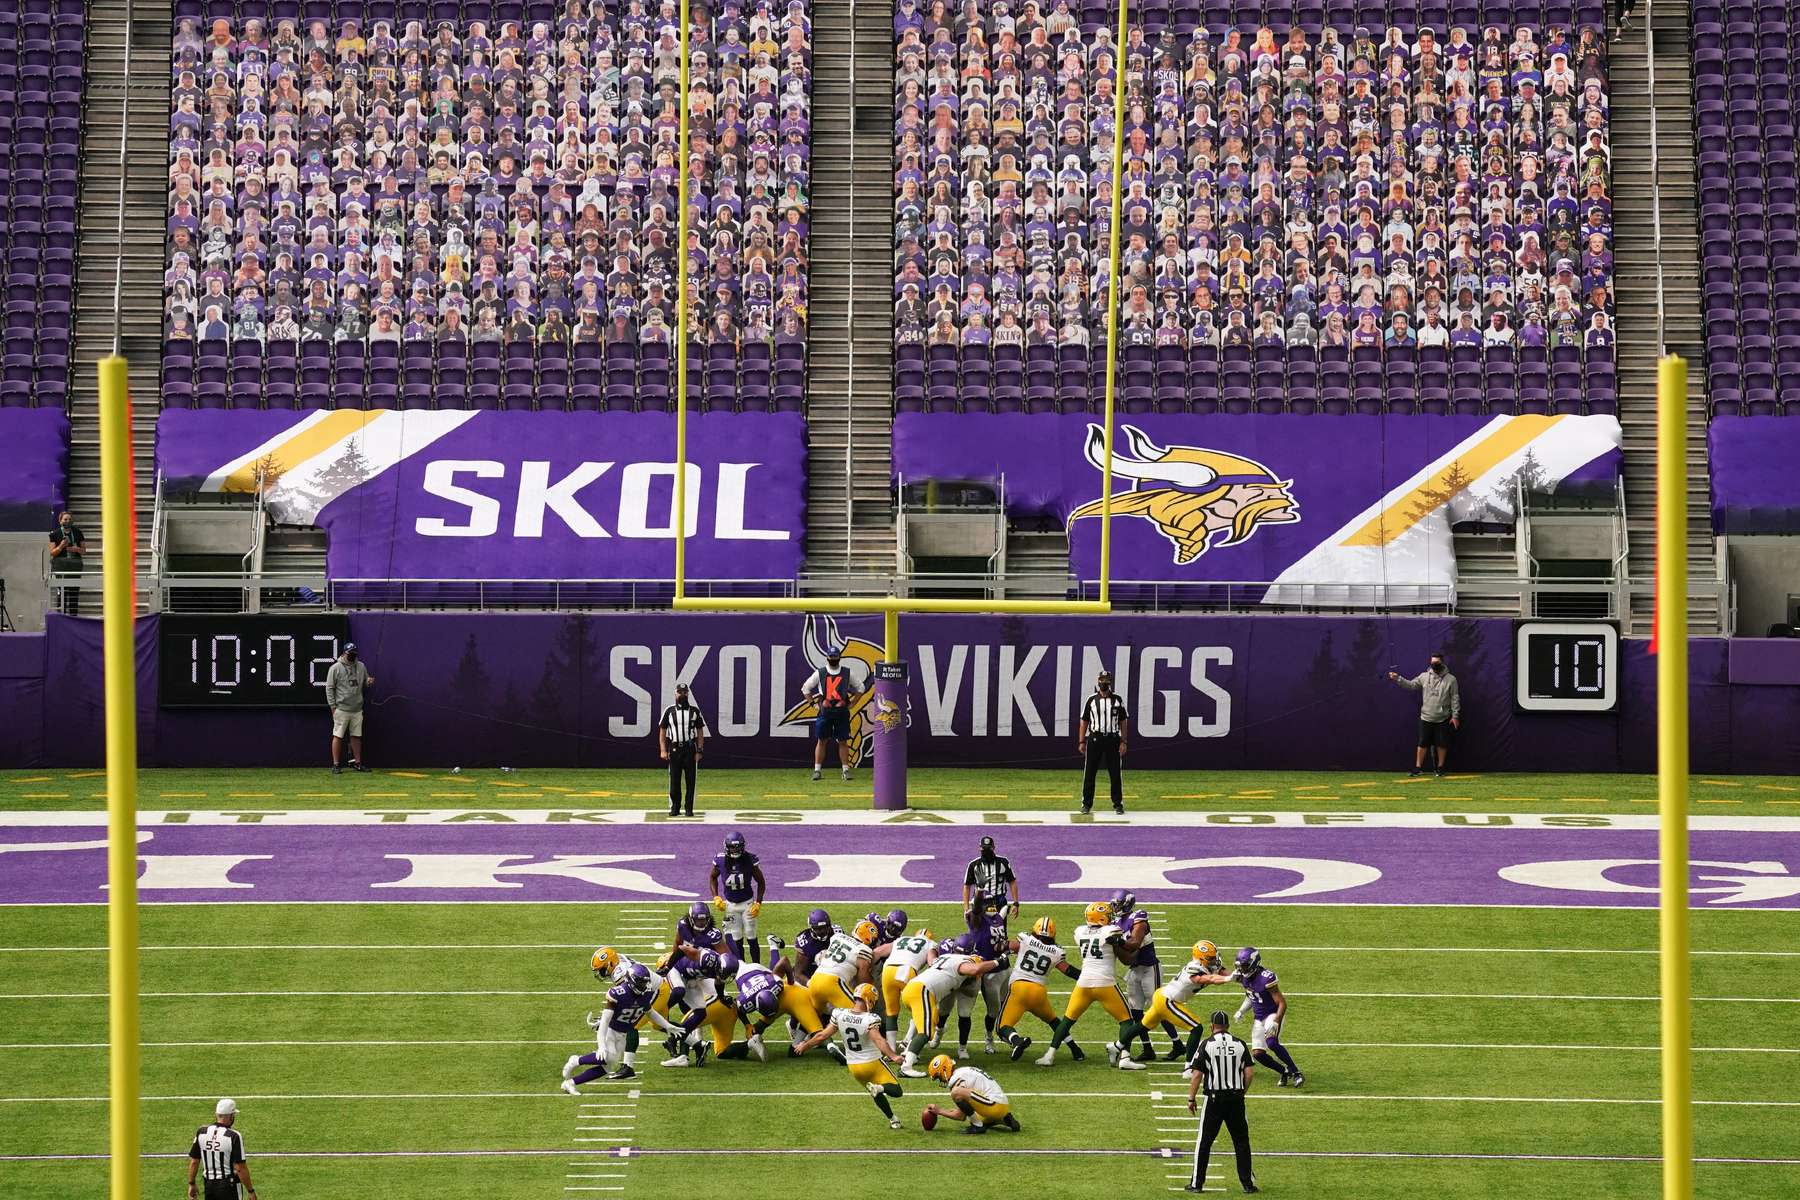 Green Bay Packers kicker Mason Crosby kicked an extra point in the fourth quarter of the Minnesota Vikings NFL season opener, sans fans to comply with regulations meant to slow the spread of COVID-19, at U.S. Bank Stadium in Minneapolis. 